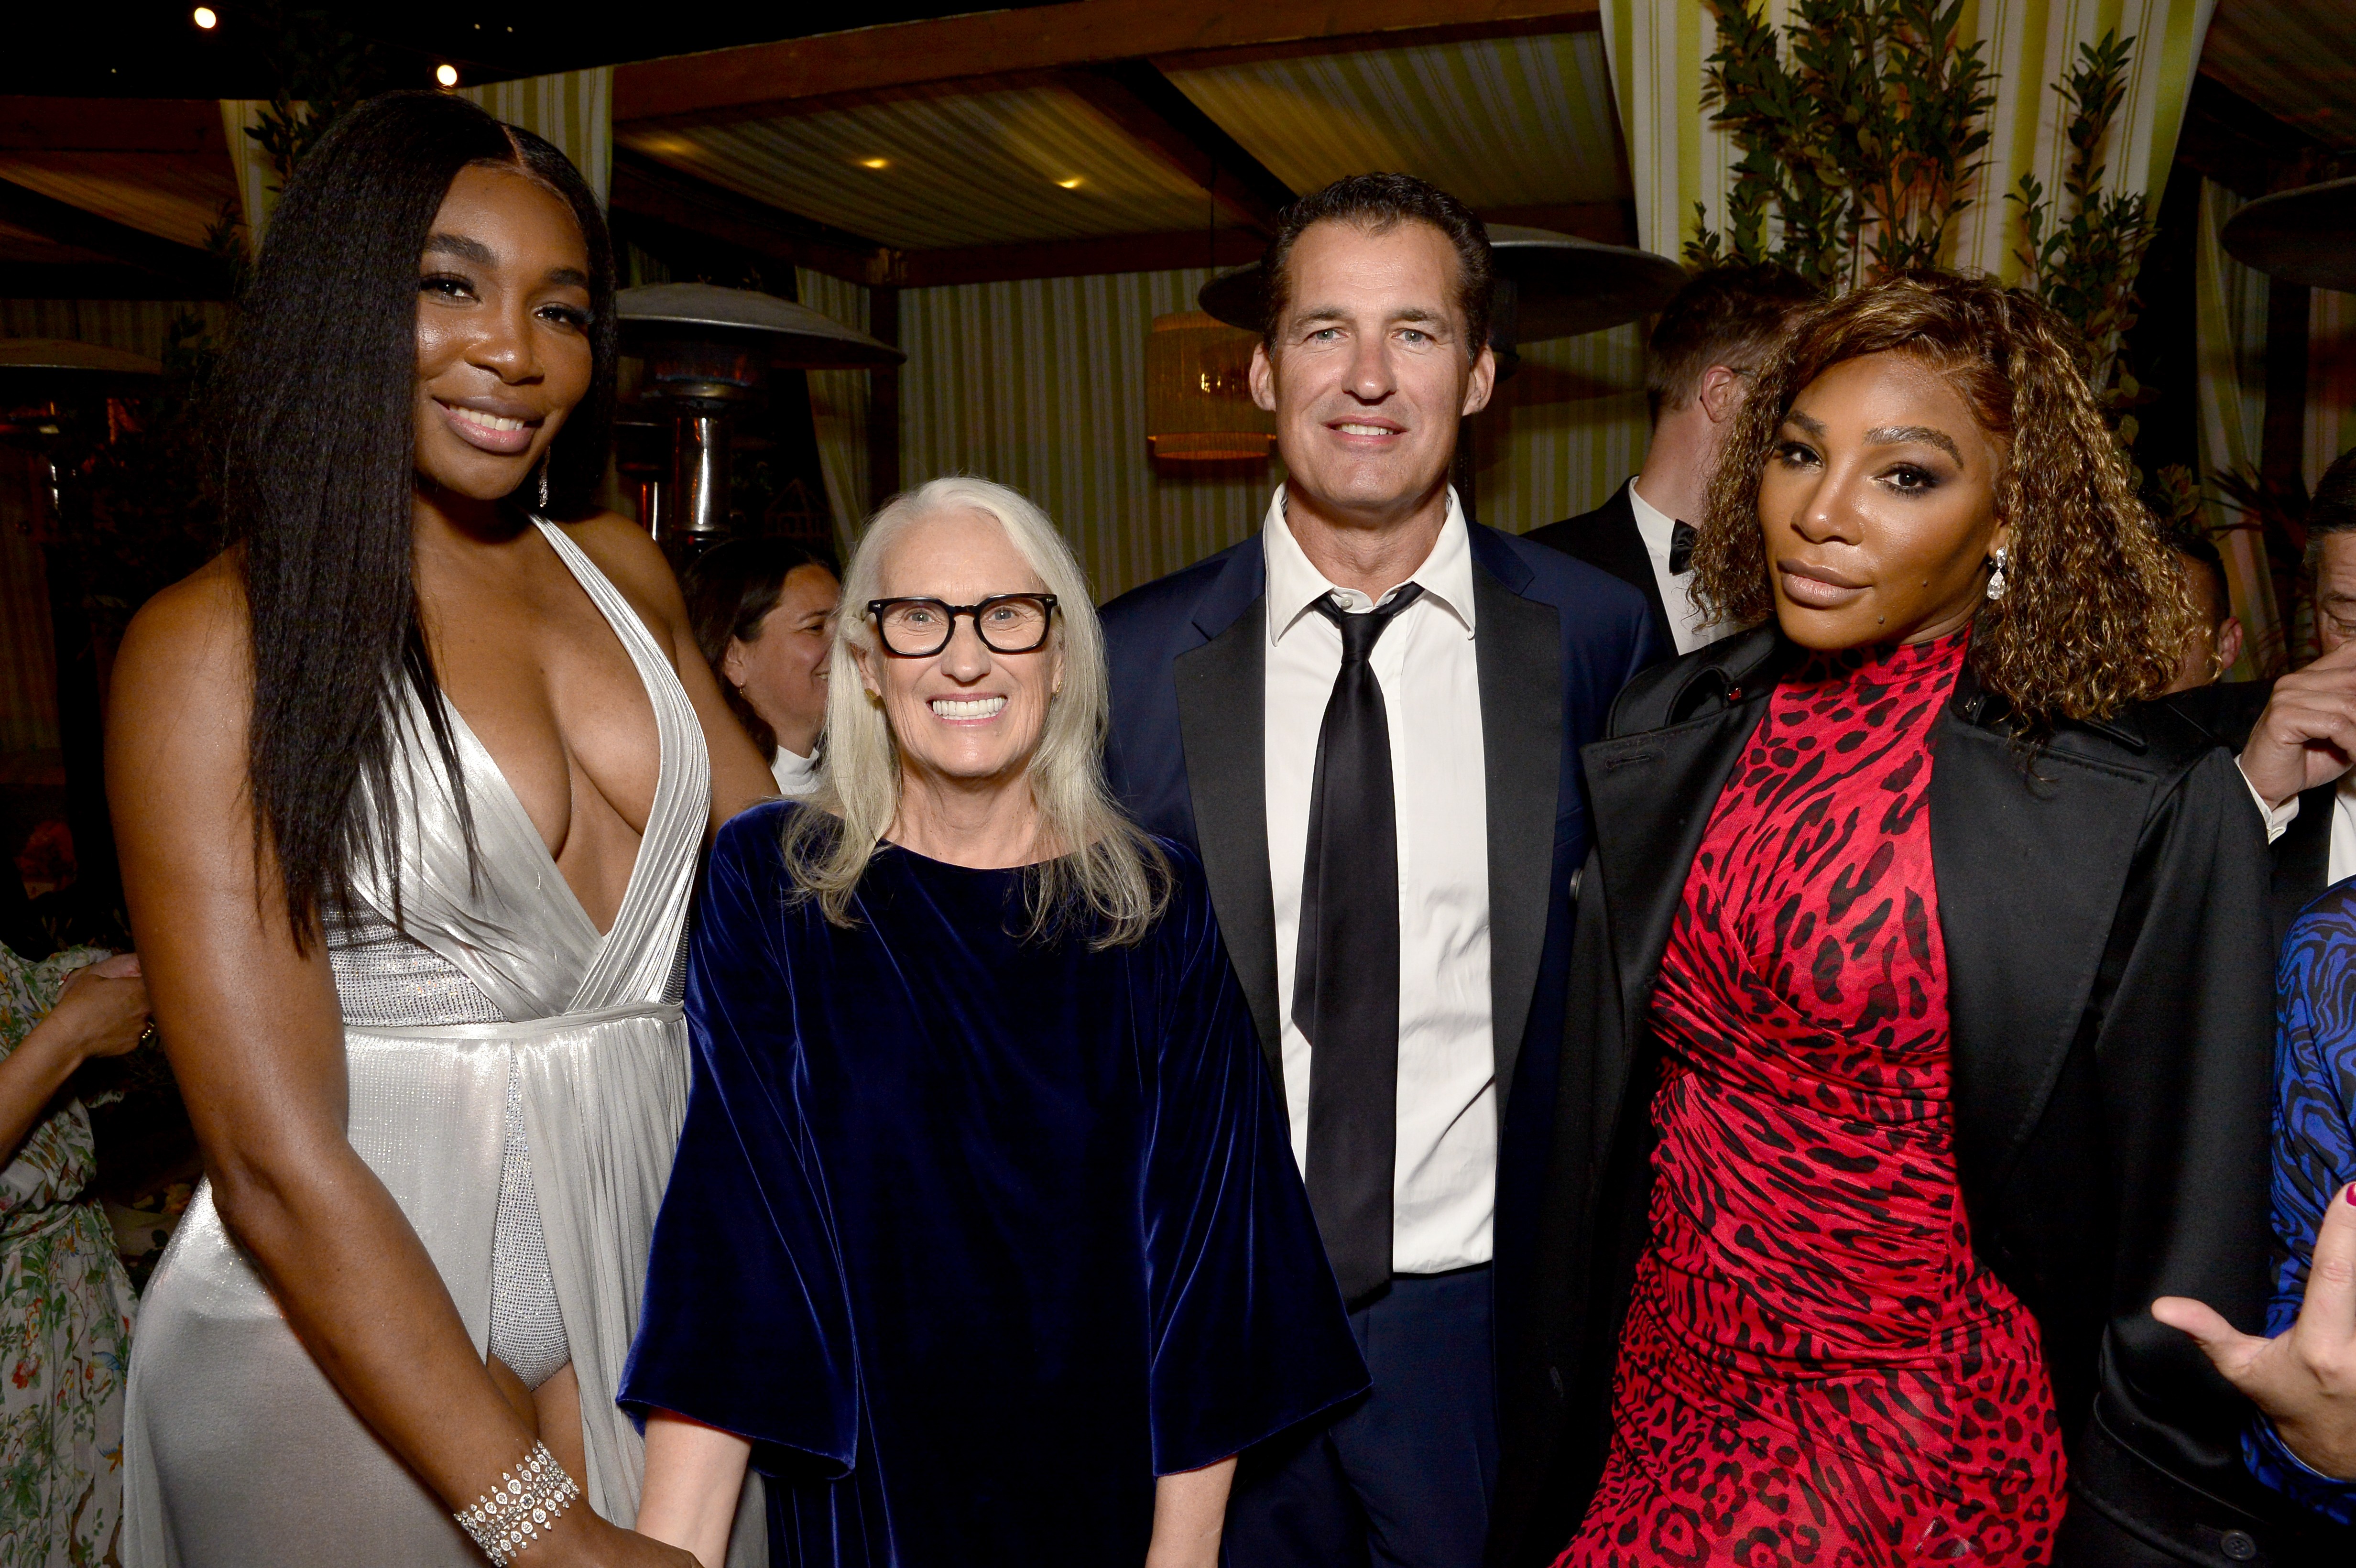 CENTURY CITY, CALIFORNIA - MARCH 13: (L-R) Venus Williams, Jane Campion, Head of Global Film at Netflix Scott Stuber, and Serena Williams attend Netflix's Critics Choice Awards After Party at Lumiere Brasserie Restaurant on March 13, 2022 in Century City, (Foto: Getty Images for Netflix)